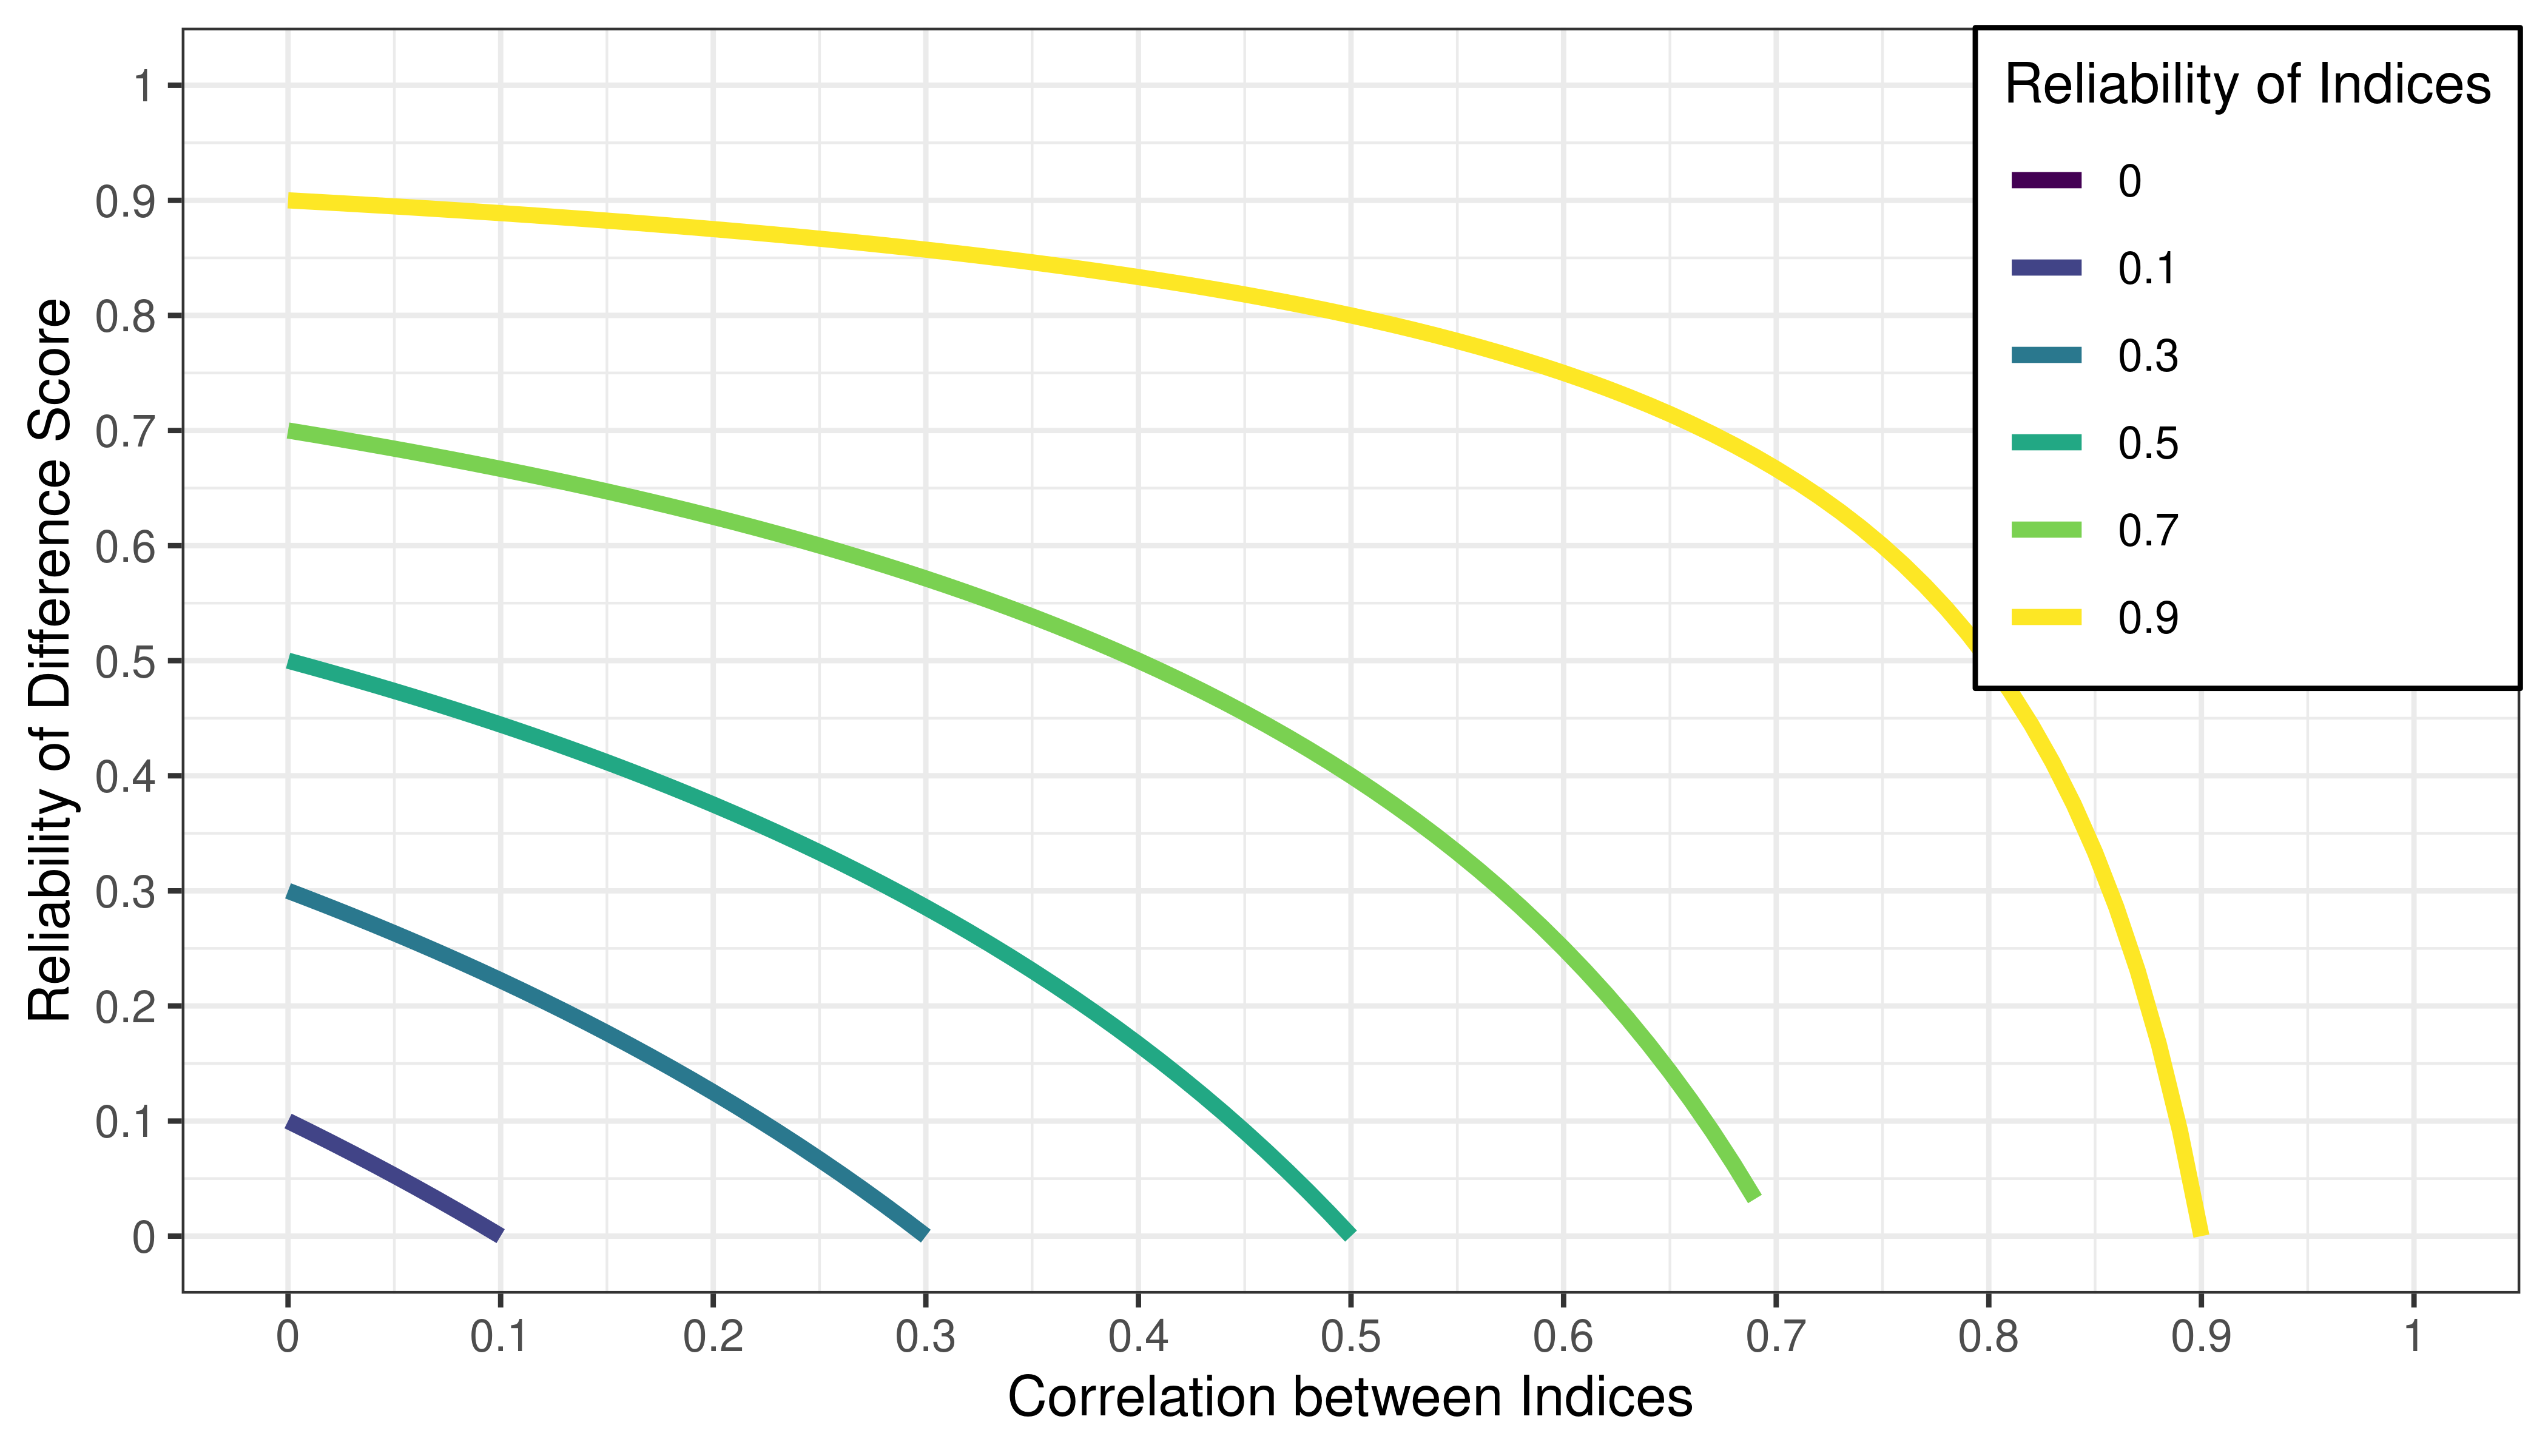 Reliability of Difference Score as a Function of Correlation Between Indices and Reliability of Indices.